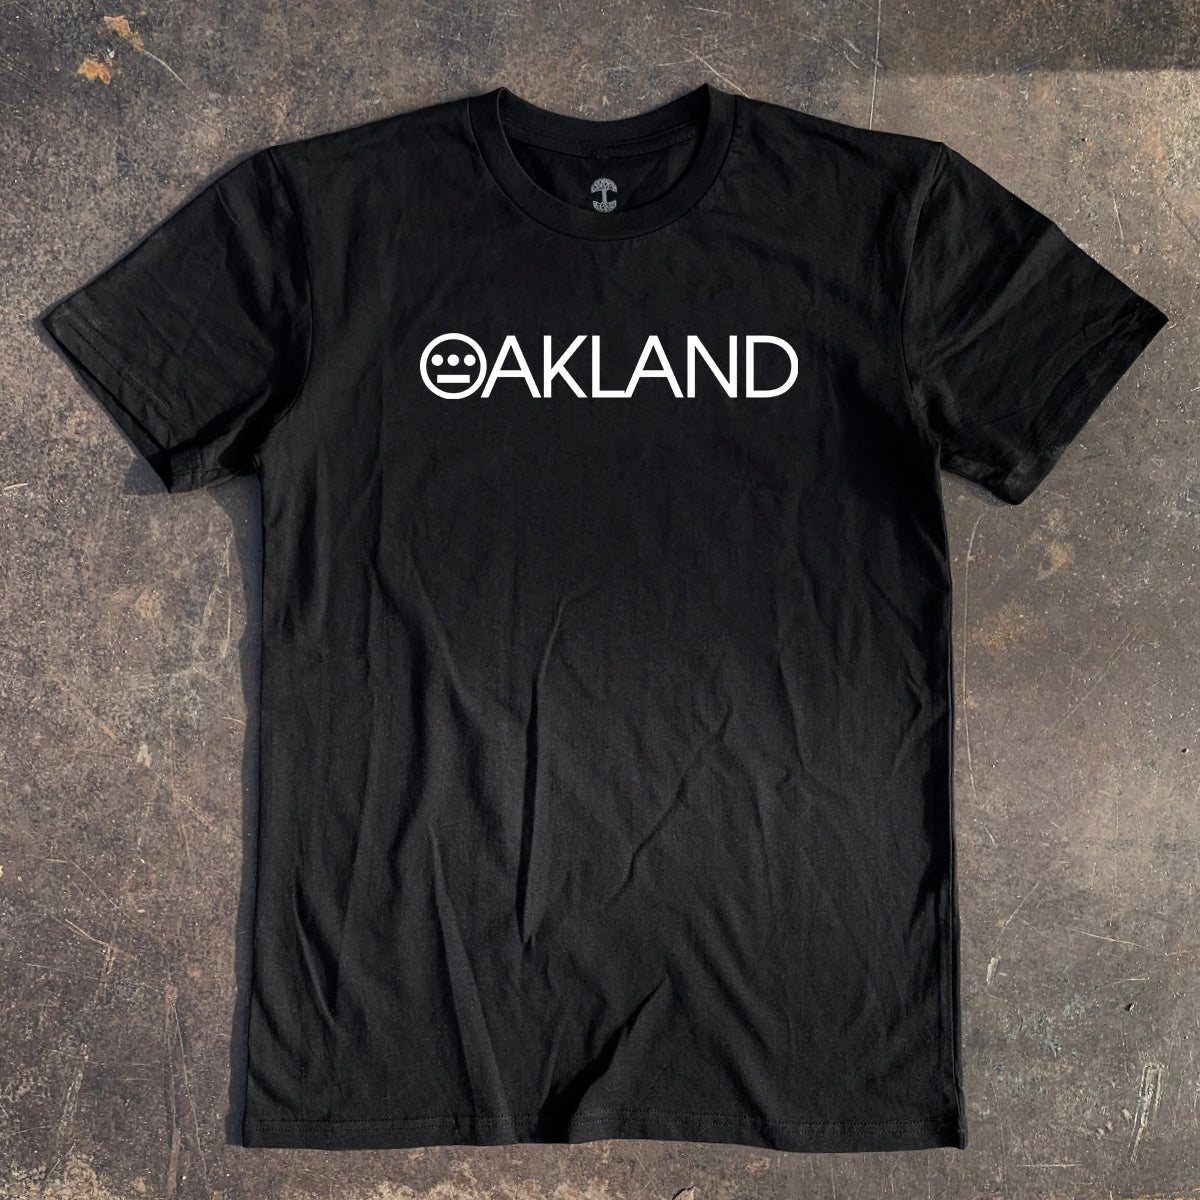 Black t-shirt with white OAKLAND wordmark with Hieroglyphics hip-hop crew logo as the O laying on asphalt.